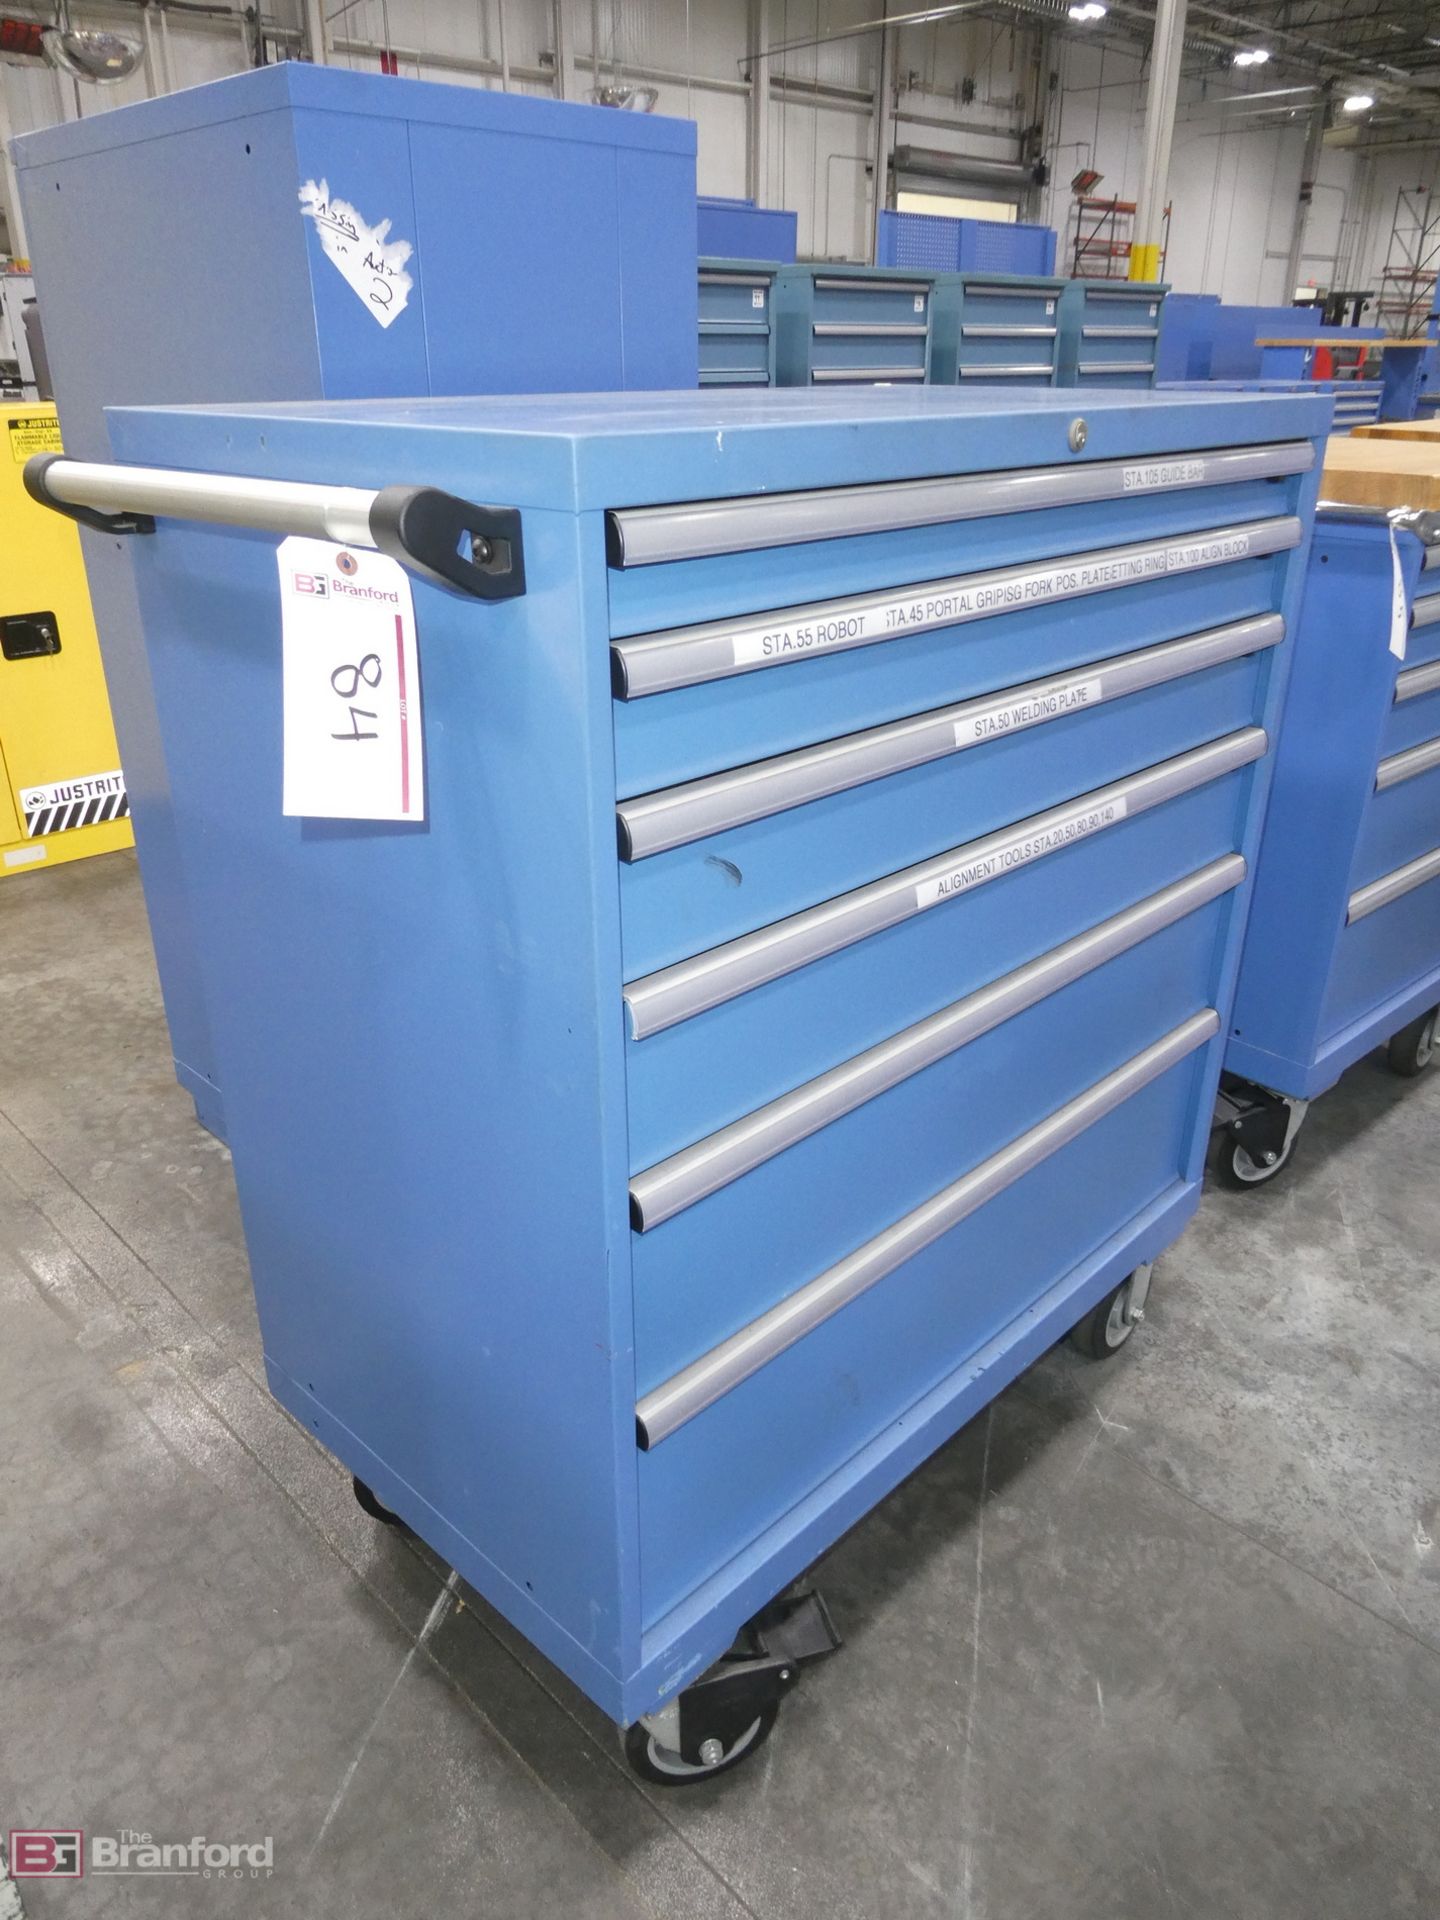 6-Drawer Portable Tool/Parts Cabinet 40"x40"x22" - Image 2 of 3